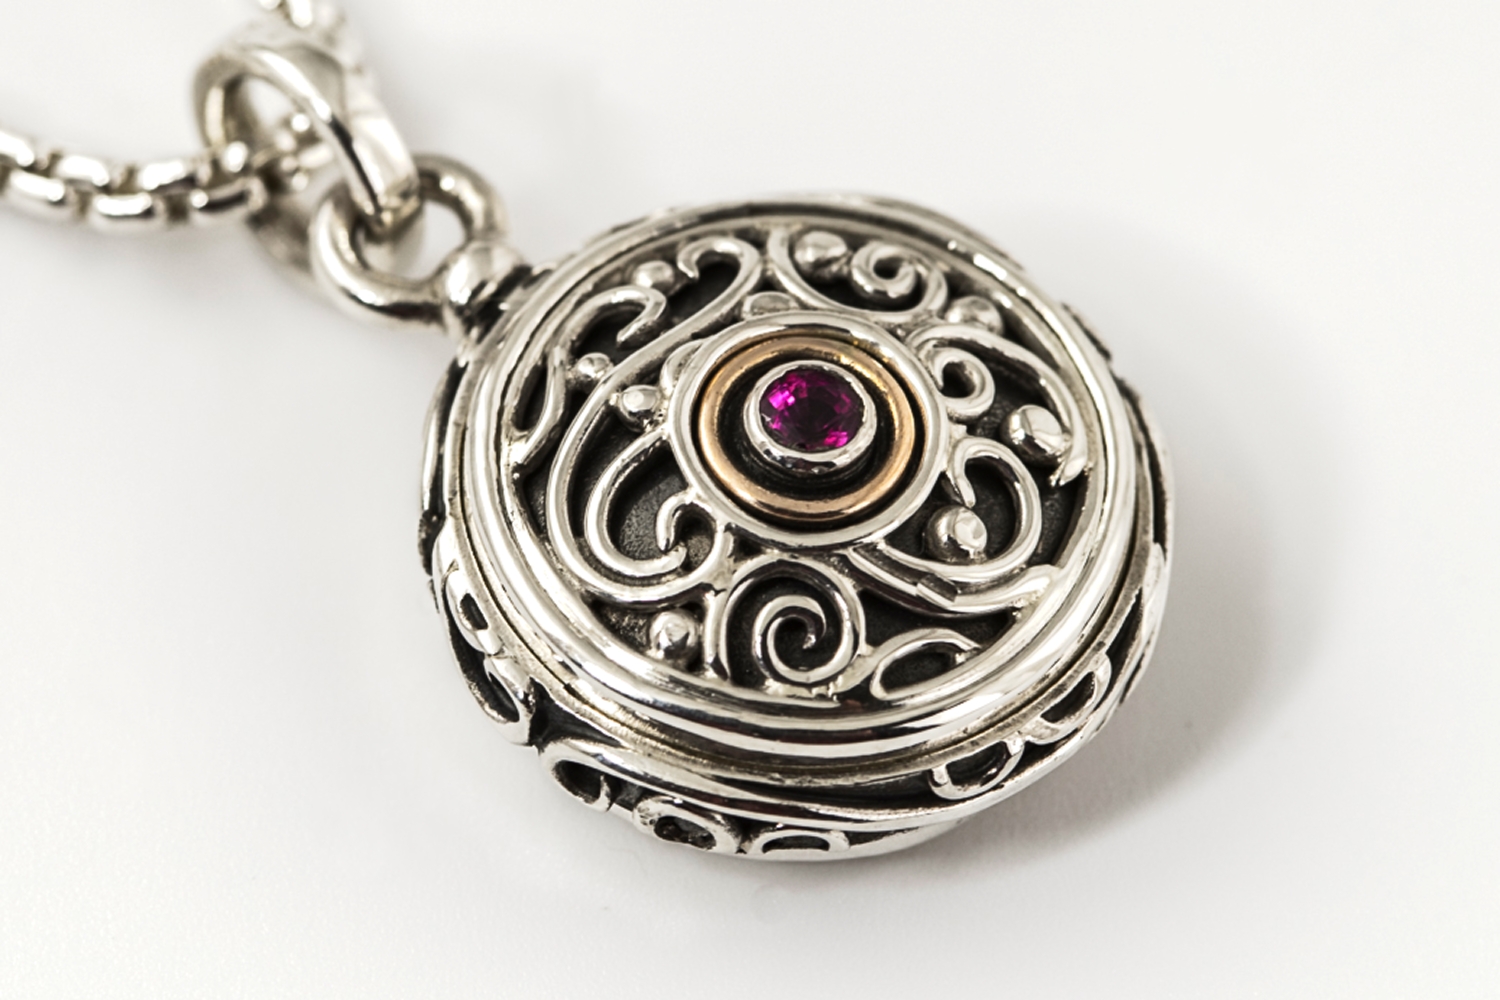 Quality silver compass pendant to stand the test of time (G600)